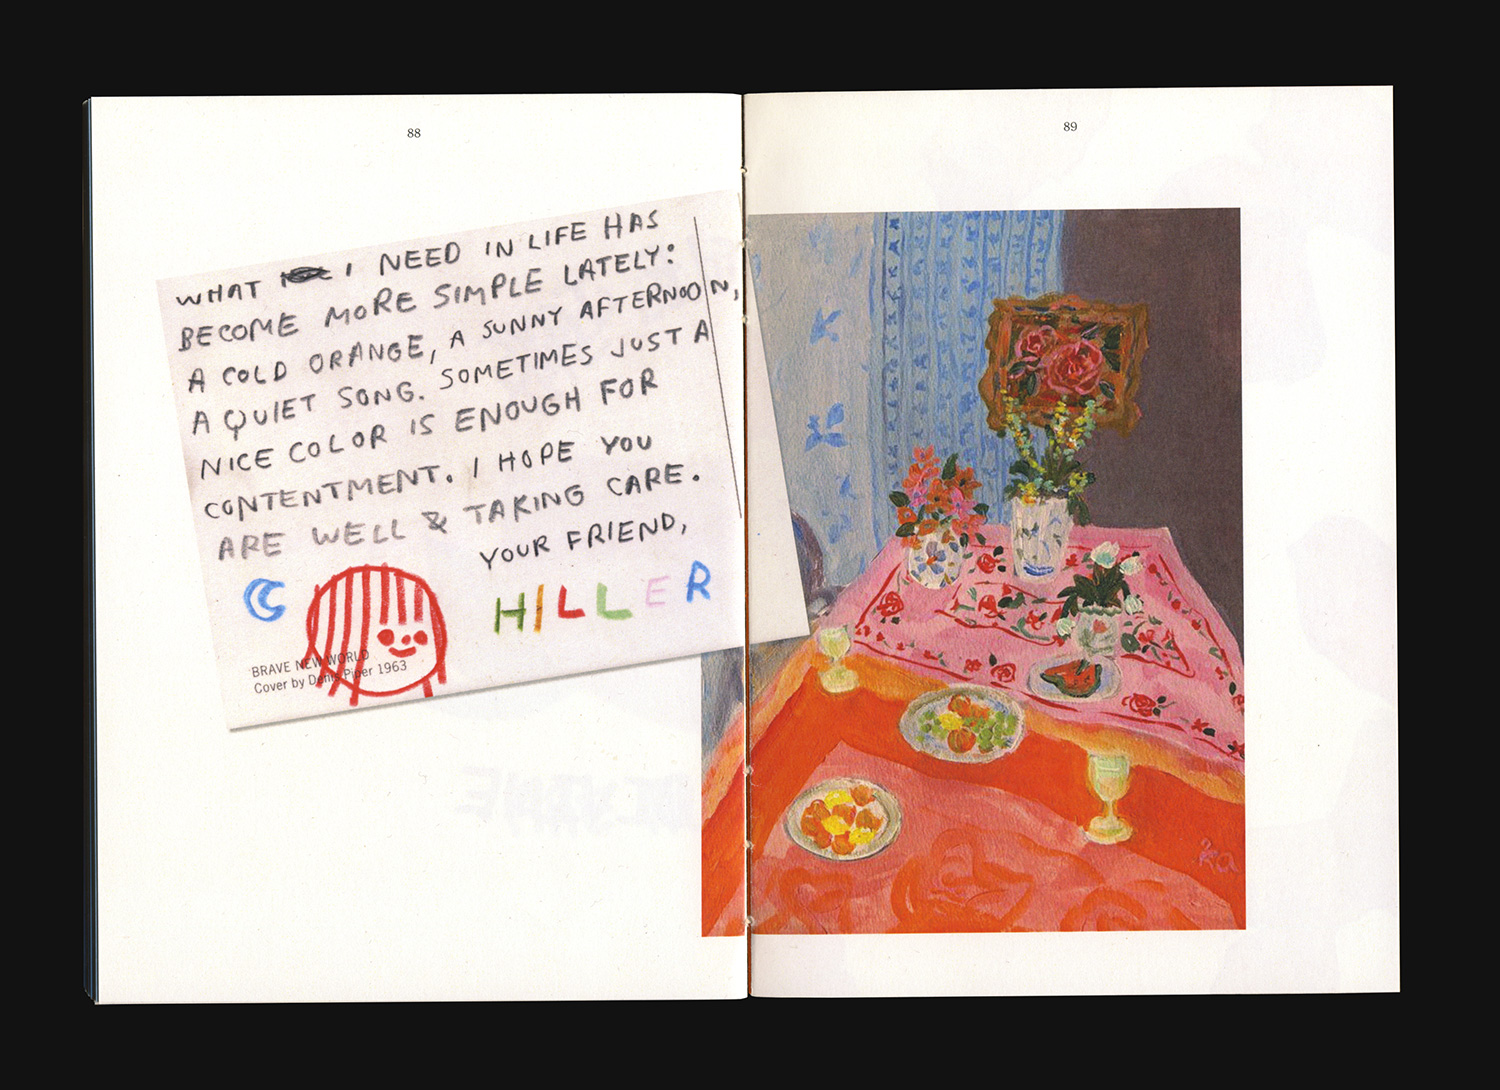 Book spread with text on a postcard and a painting.